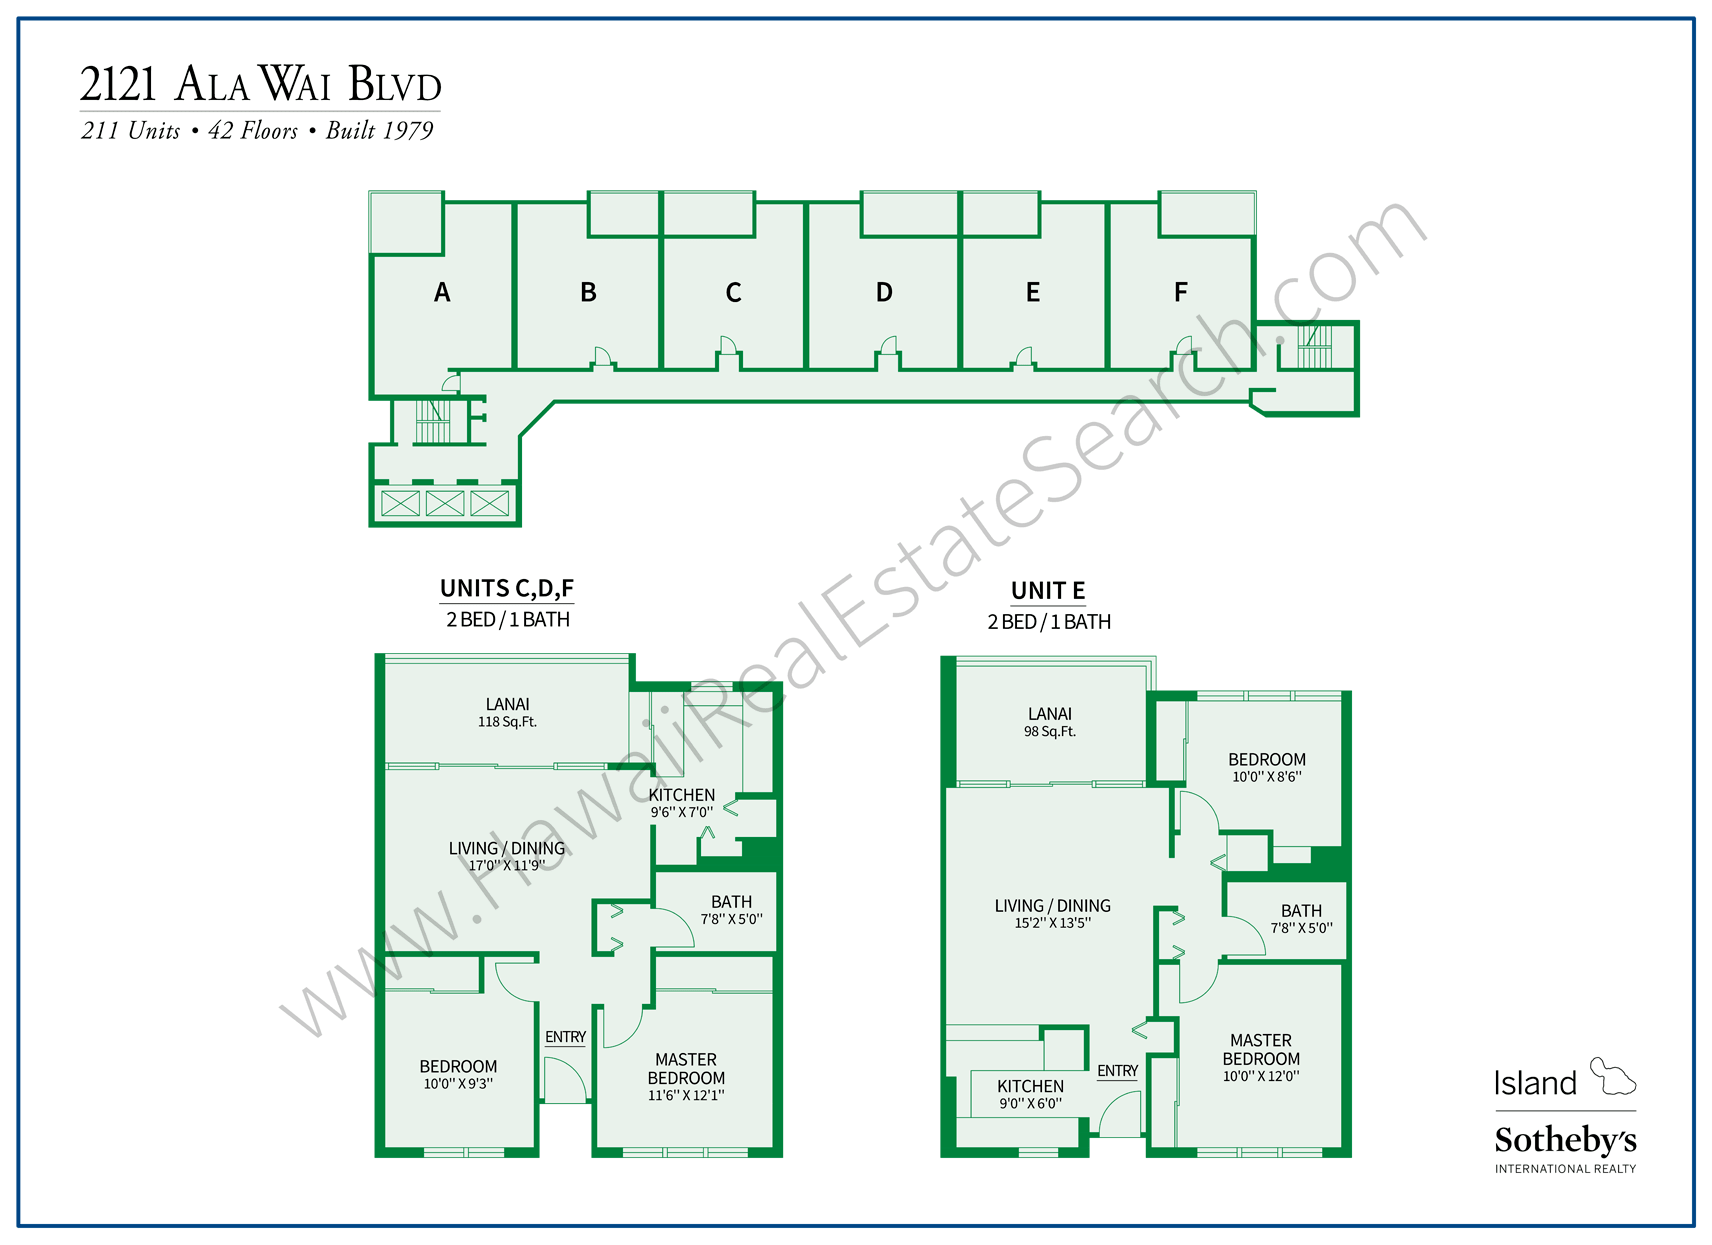 2121 Ala Wai Map with Floor Plans